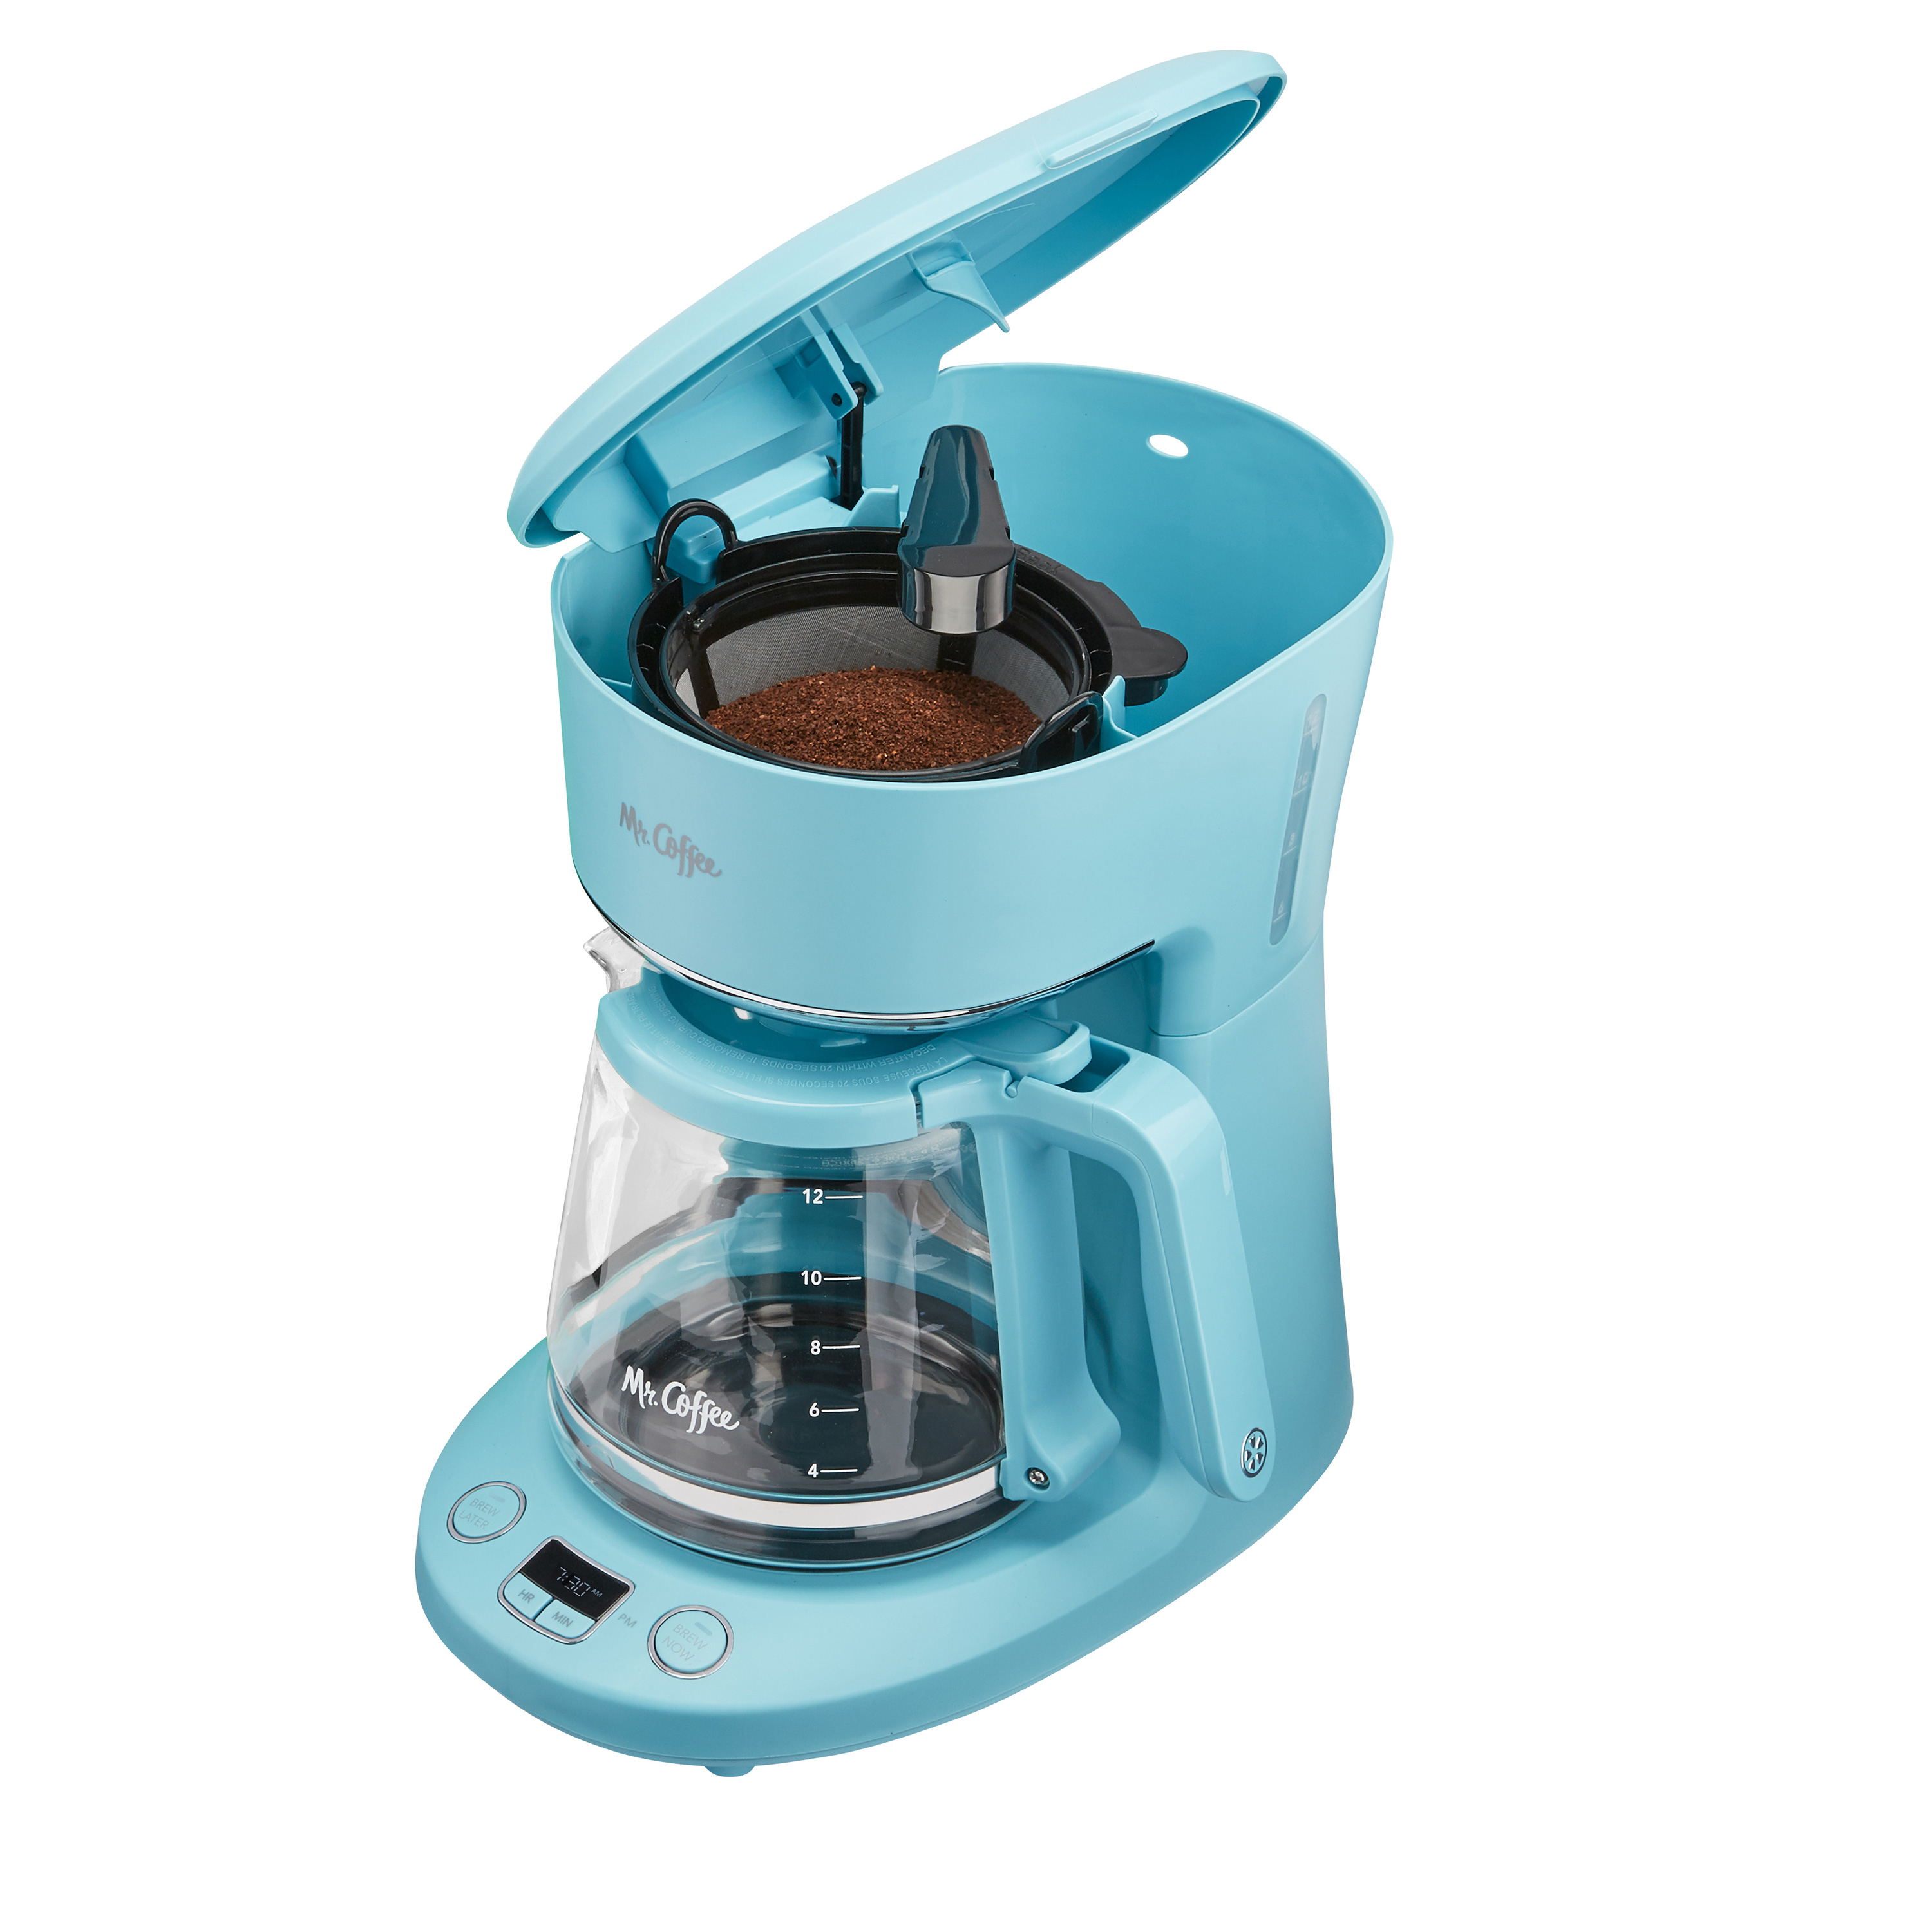 Mr. Coffee 12-Cup Programmable Coffeemaker, Arctic Blue, Brew Now or Later - image 4 of 5